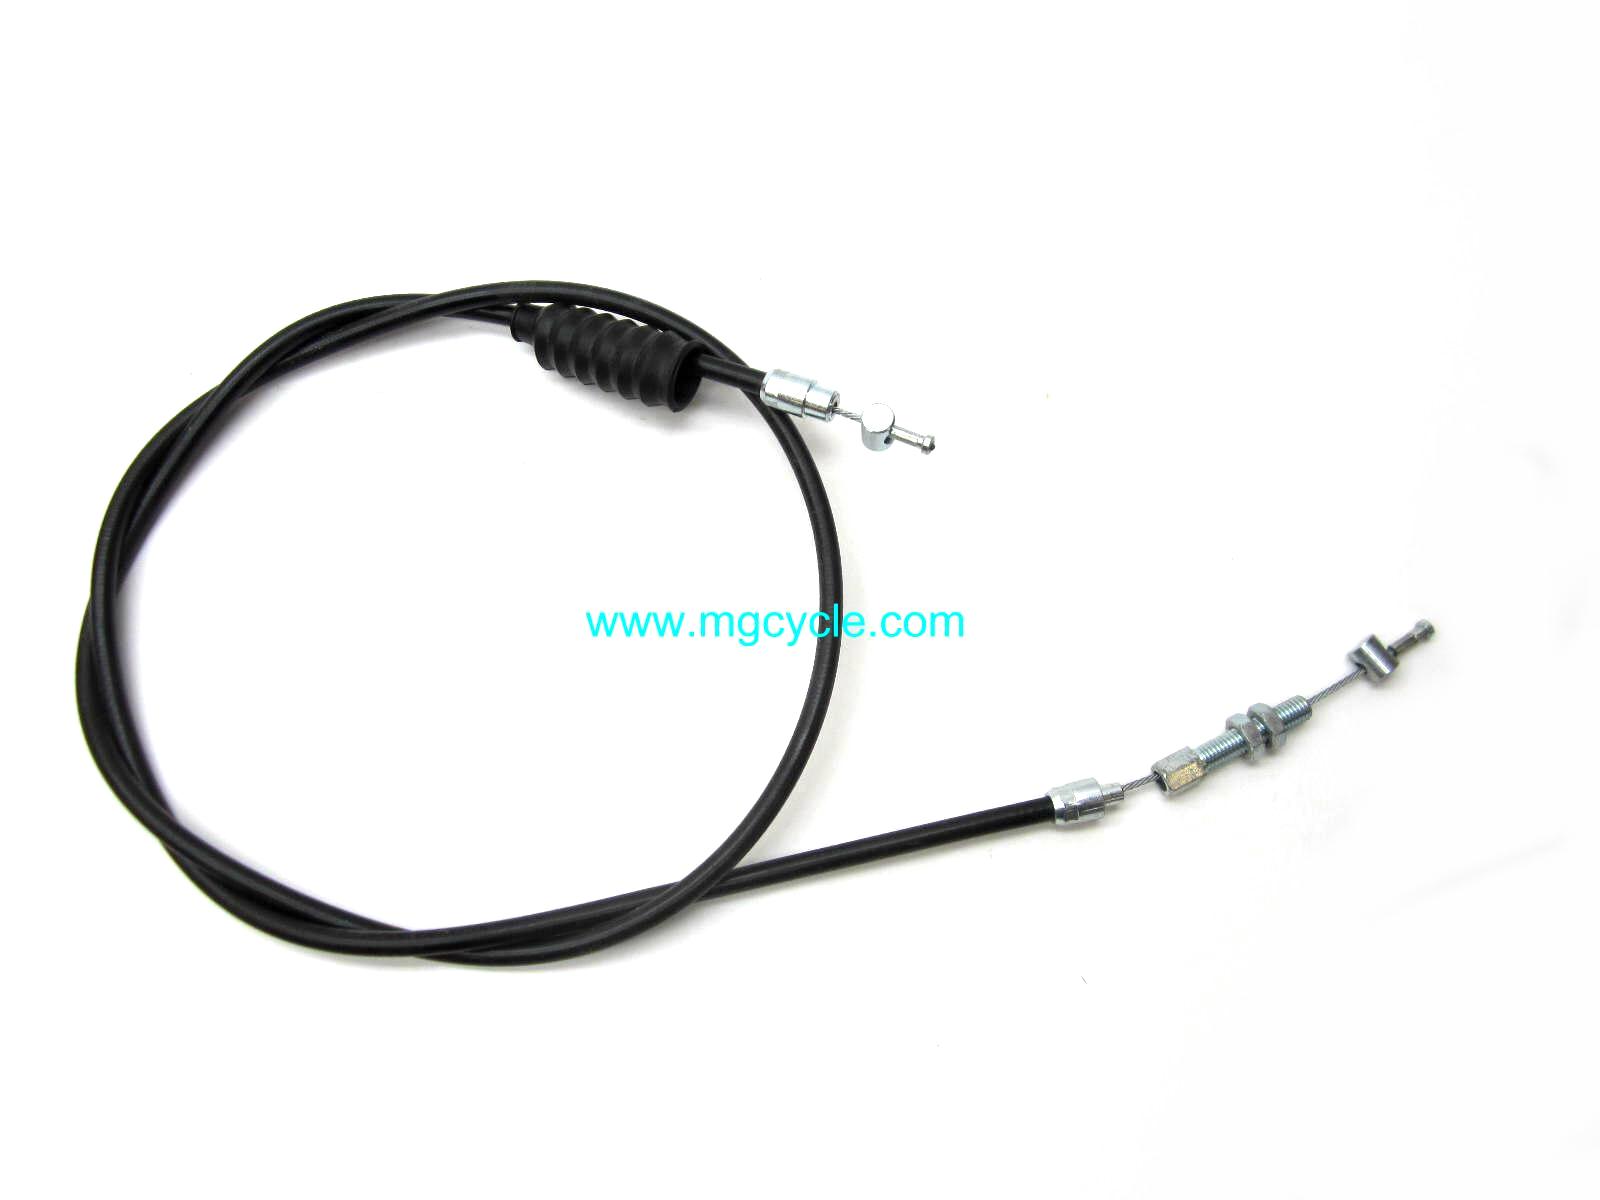 Clutch cable, T5 3rd series 1983-88, Mille GT 87-91